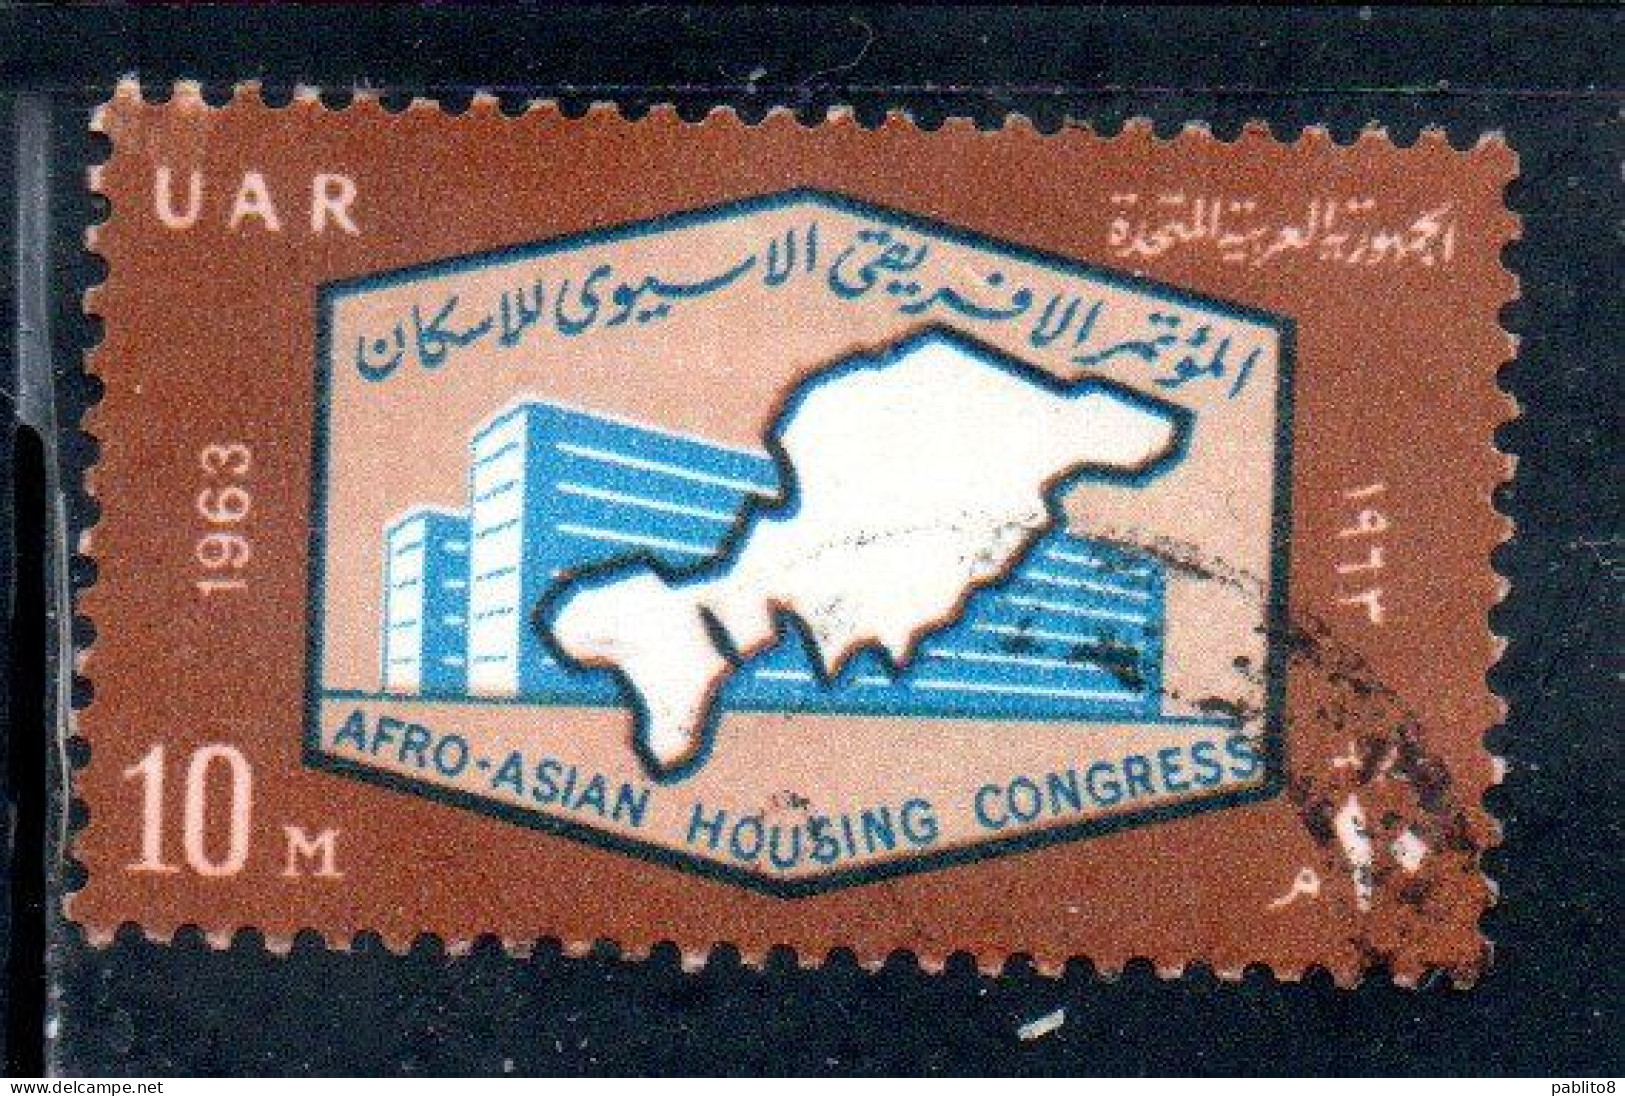 UAR EGYPT EGITTO 1963 AFRO-ASIAN HOUSING CONGRESS MODERN BUILDING AND MAP 10m  USED USATO OBLITERE' - Gebraucht